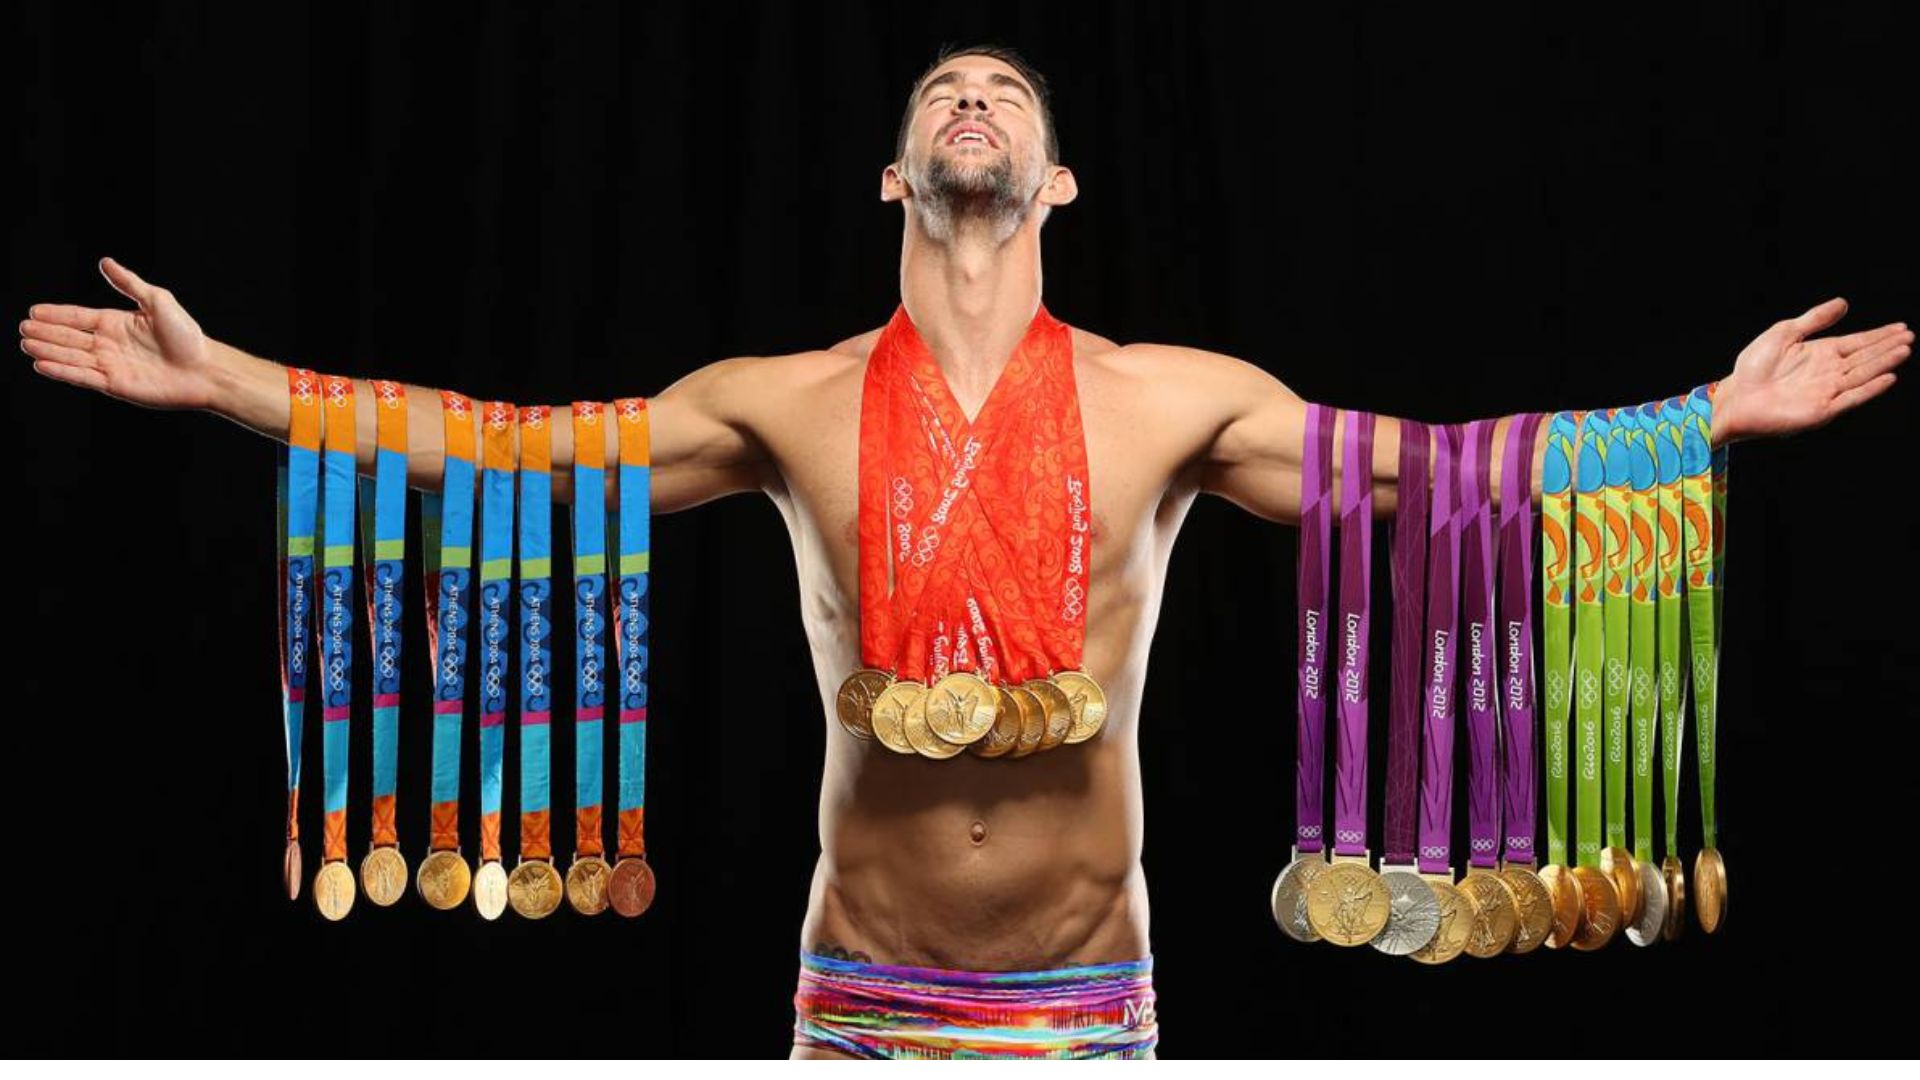 Michael Phelps With All His Medals